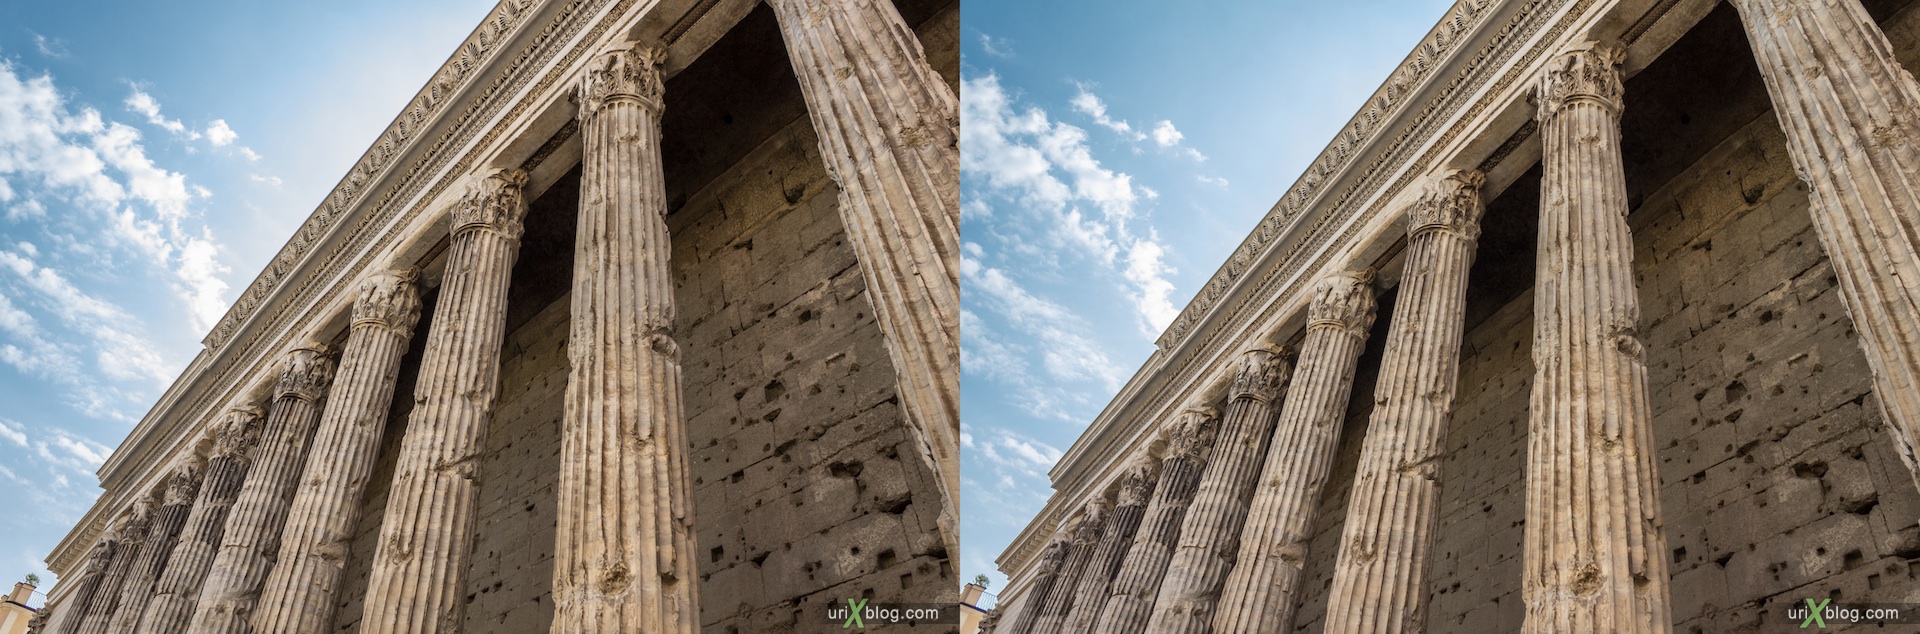 2012, di Pietra square, Rome, Italy, 3D, stereo pair, cross-eyed, crossview, cross view stereo pair